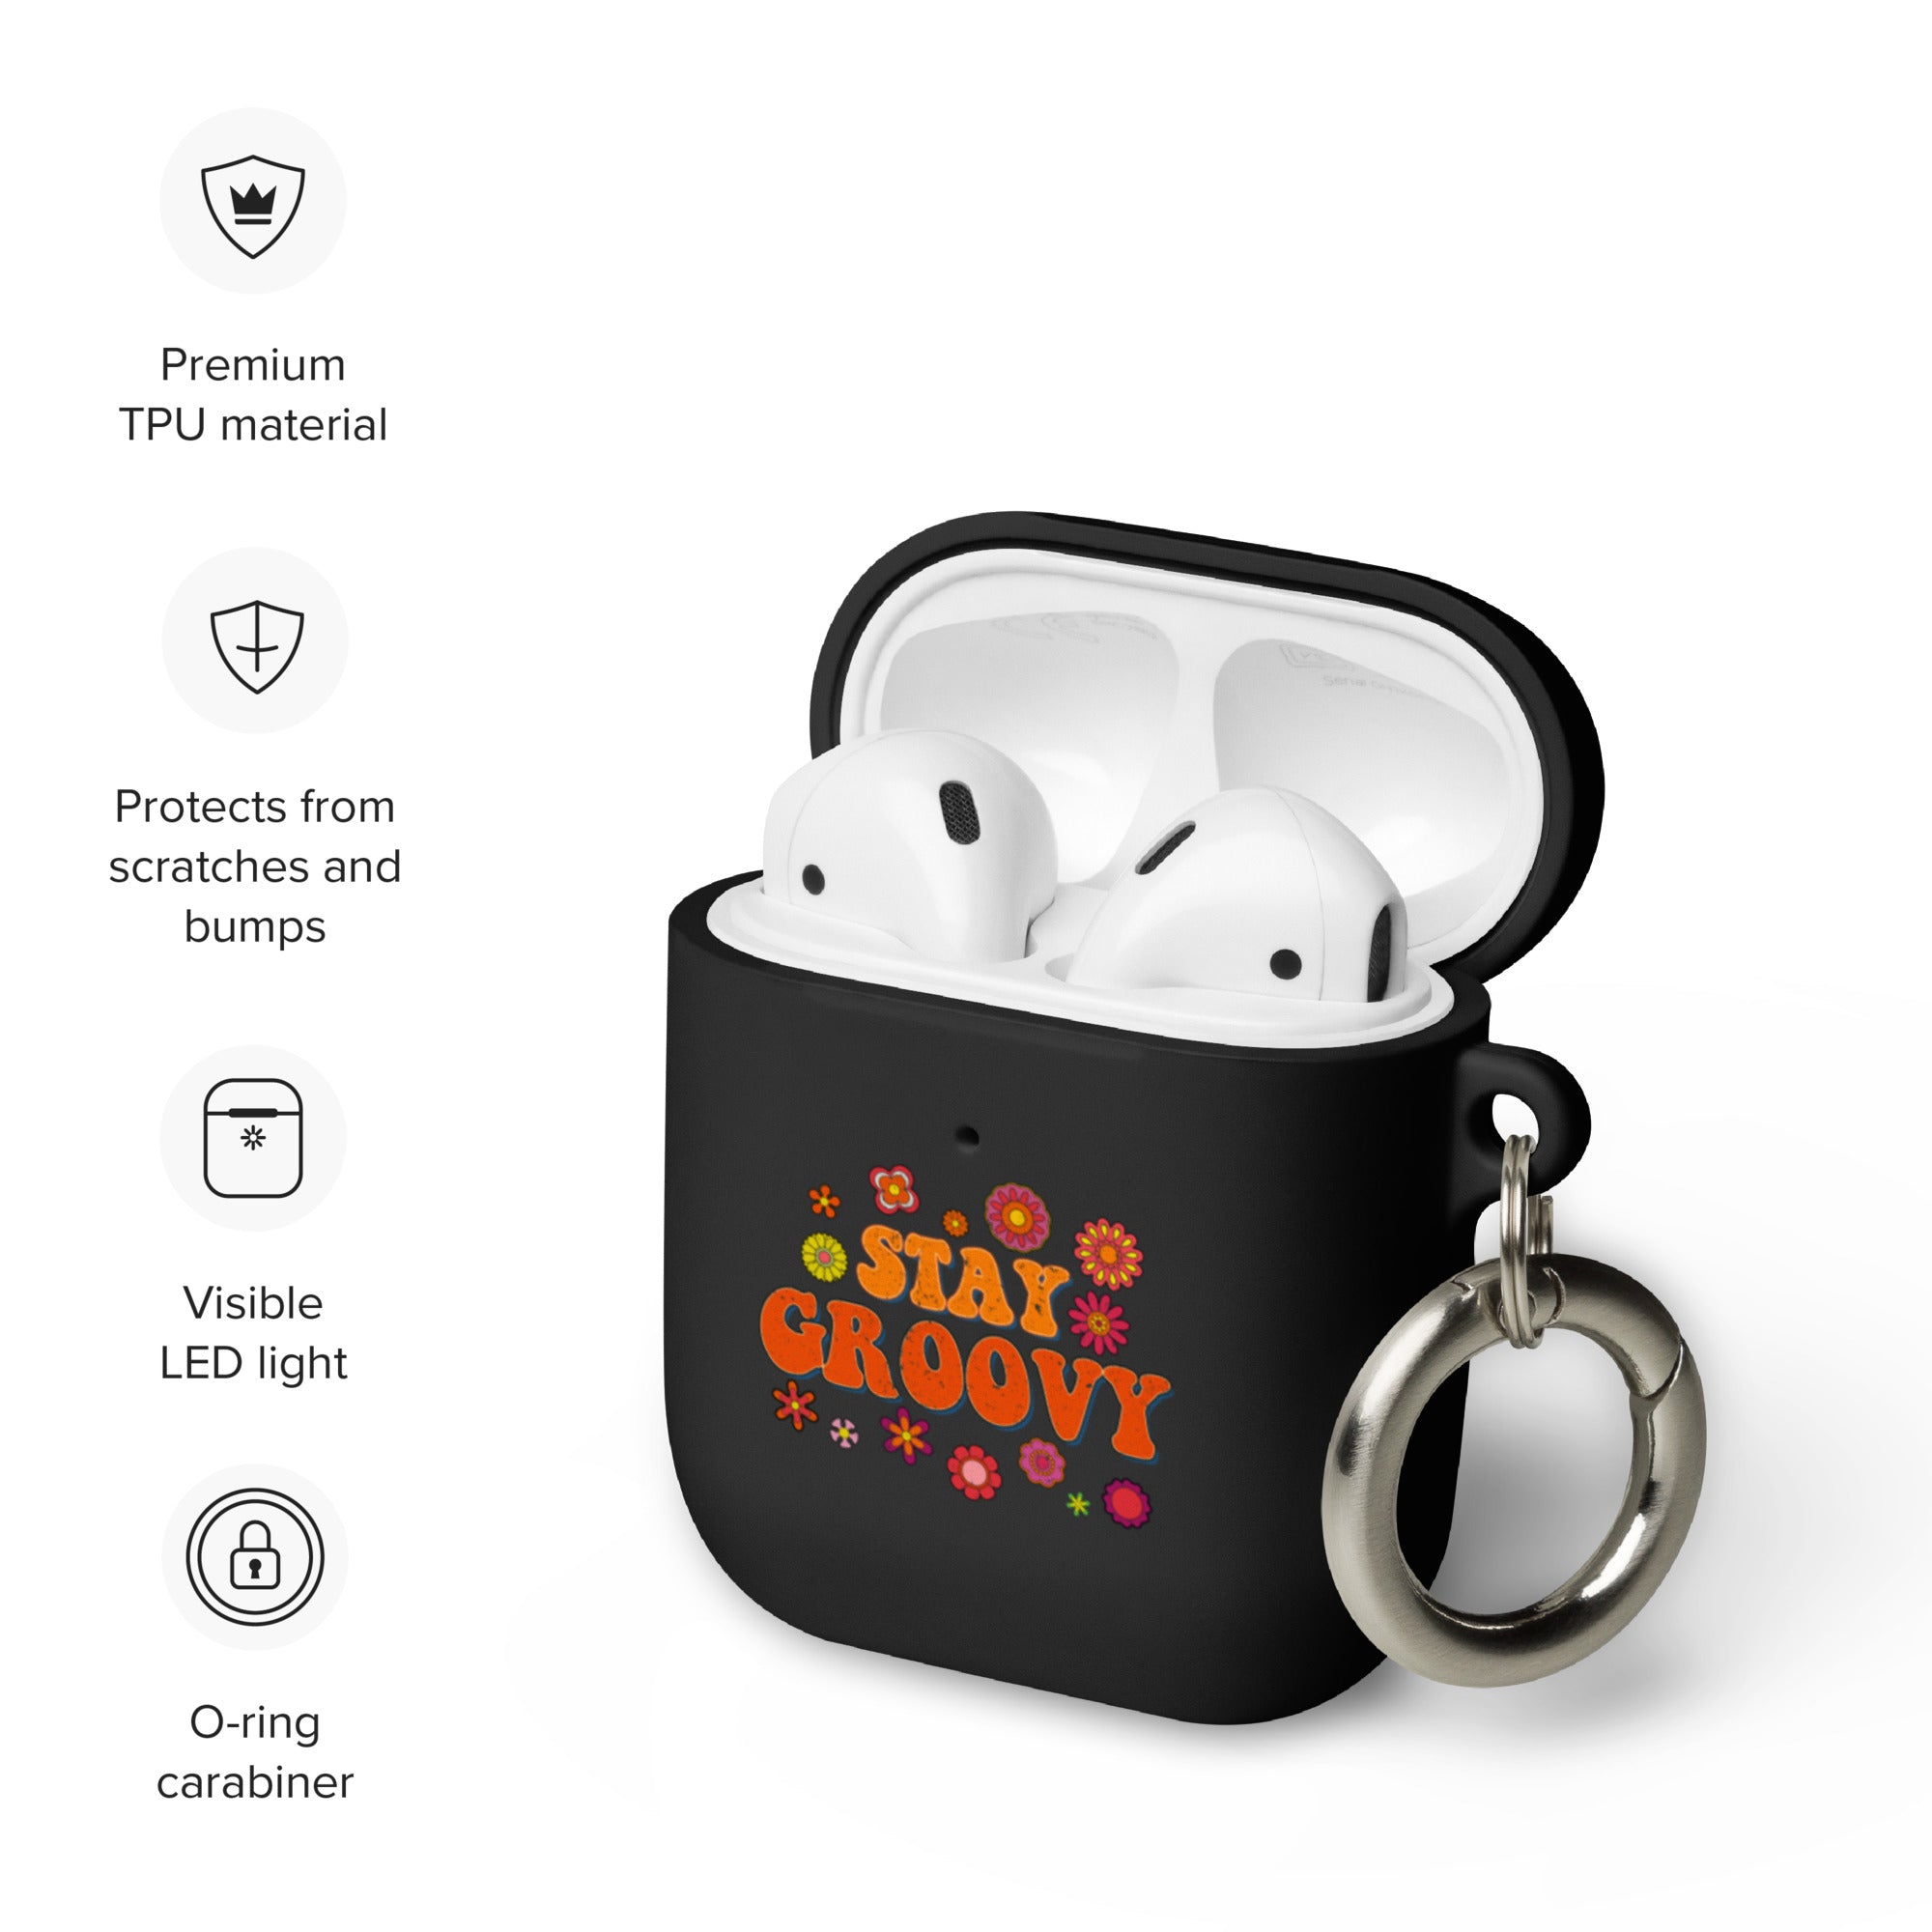 Stay Groovy - Colorful fun design - AirPods case